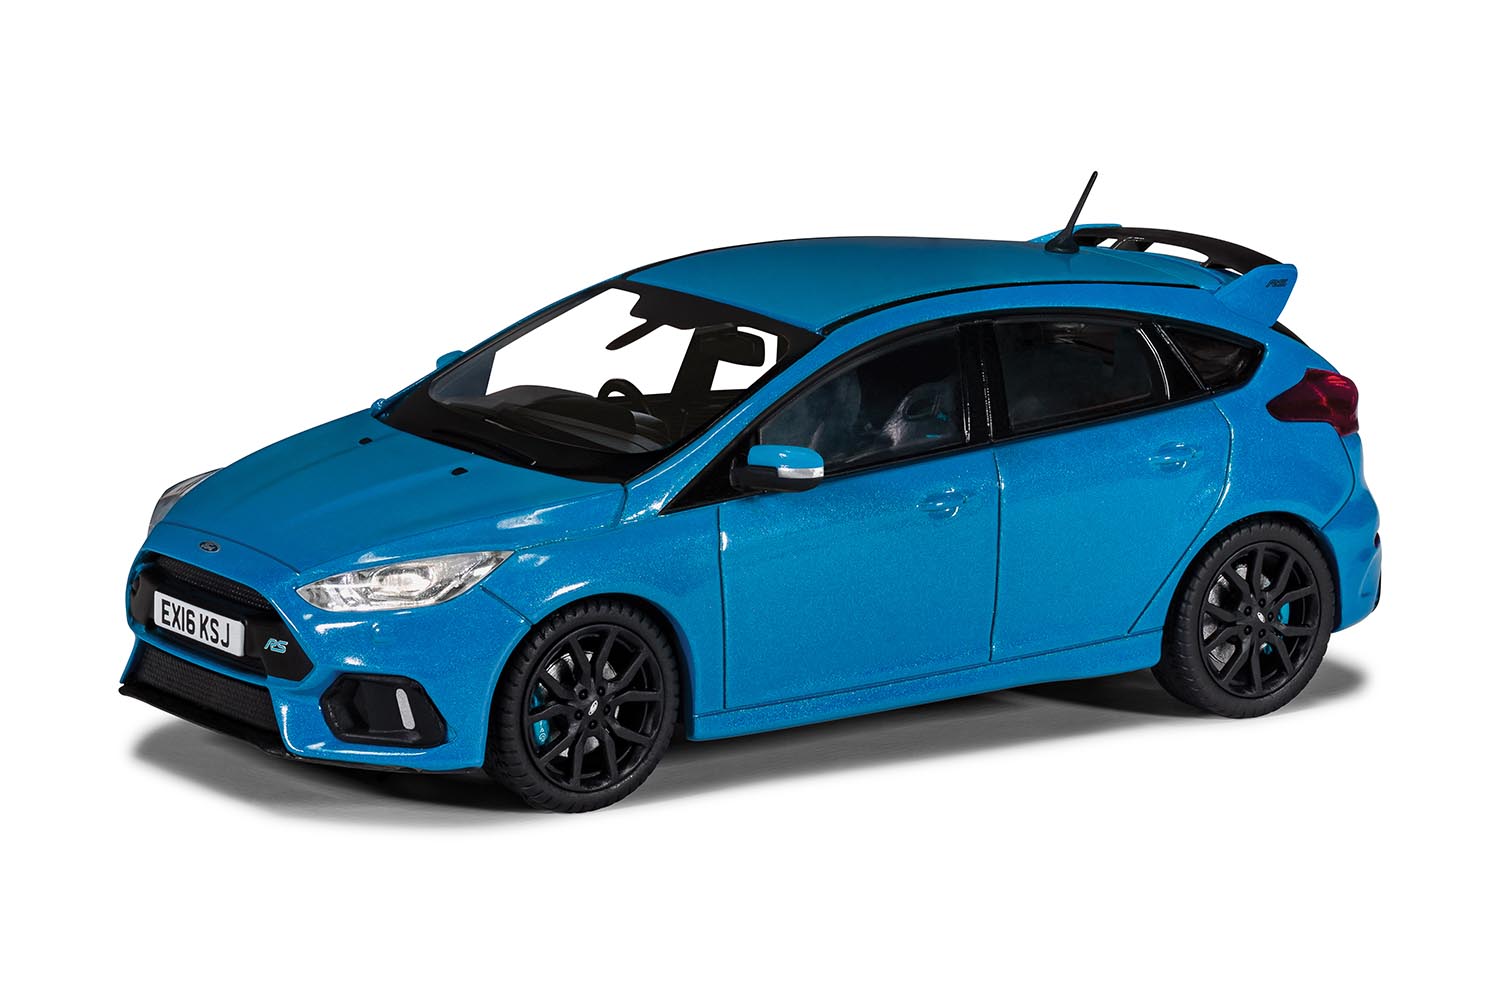 New Ford Focus RS full details on 345bhp 4x4 megahatch  Auto Express